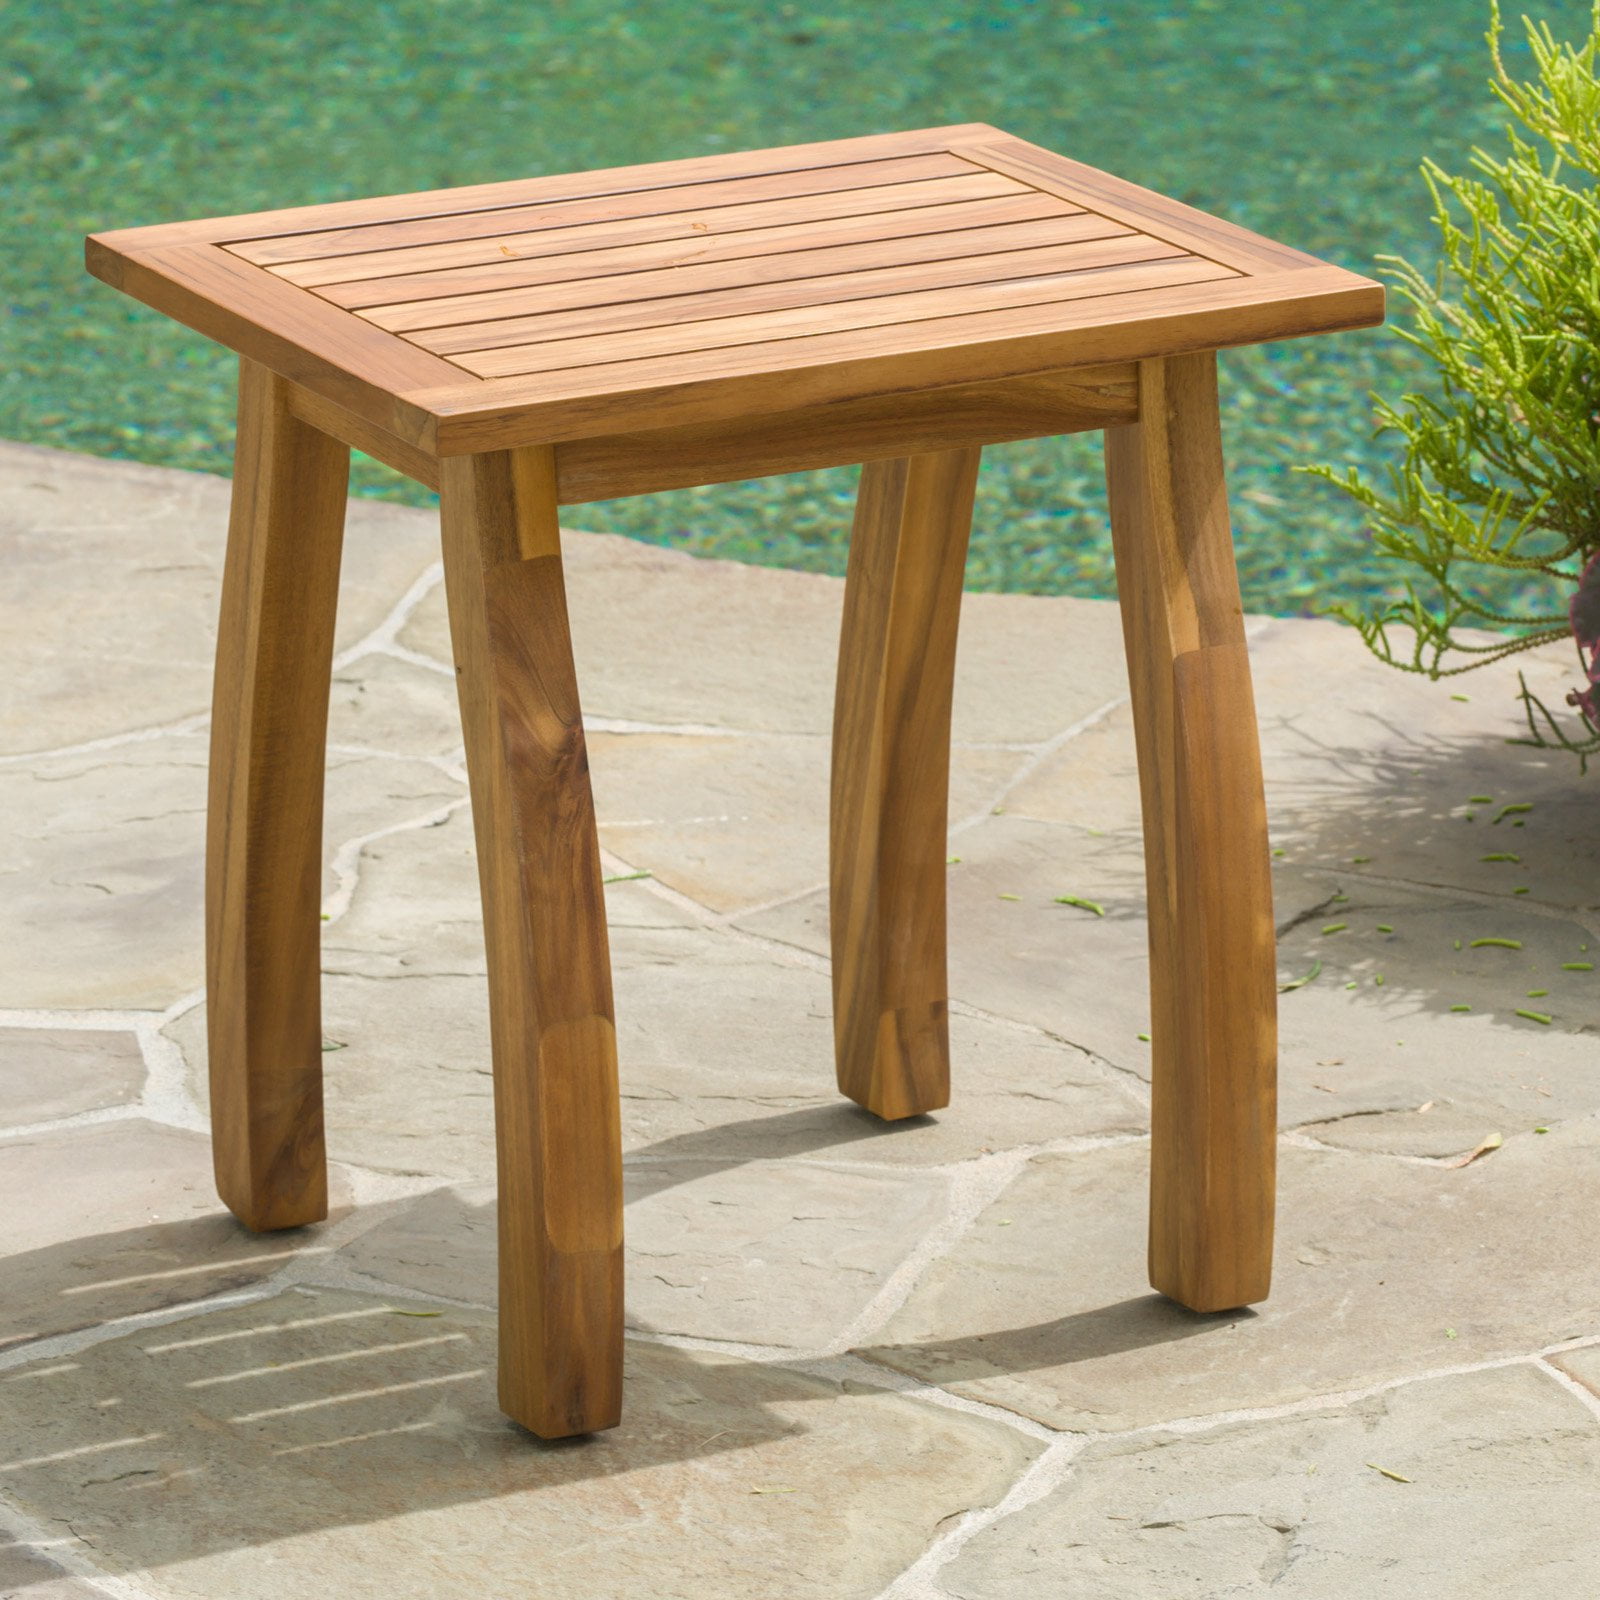 Anti-Rust and Waterproof Outdoor or Indoor Snack Table Sofa Table Small Round End Tables NUFR Home Folding Tray Metal Side Table Accent Coffee Table